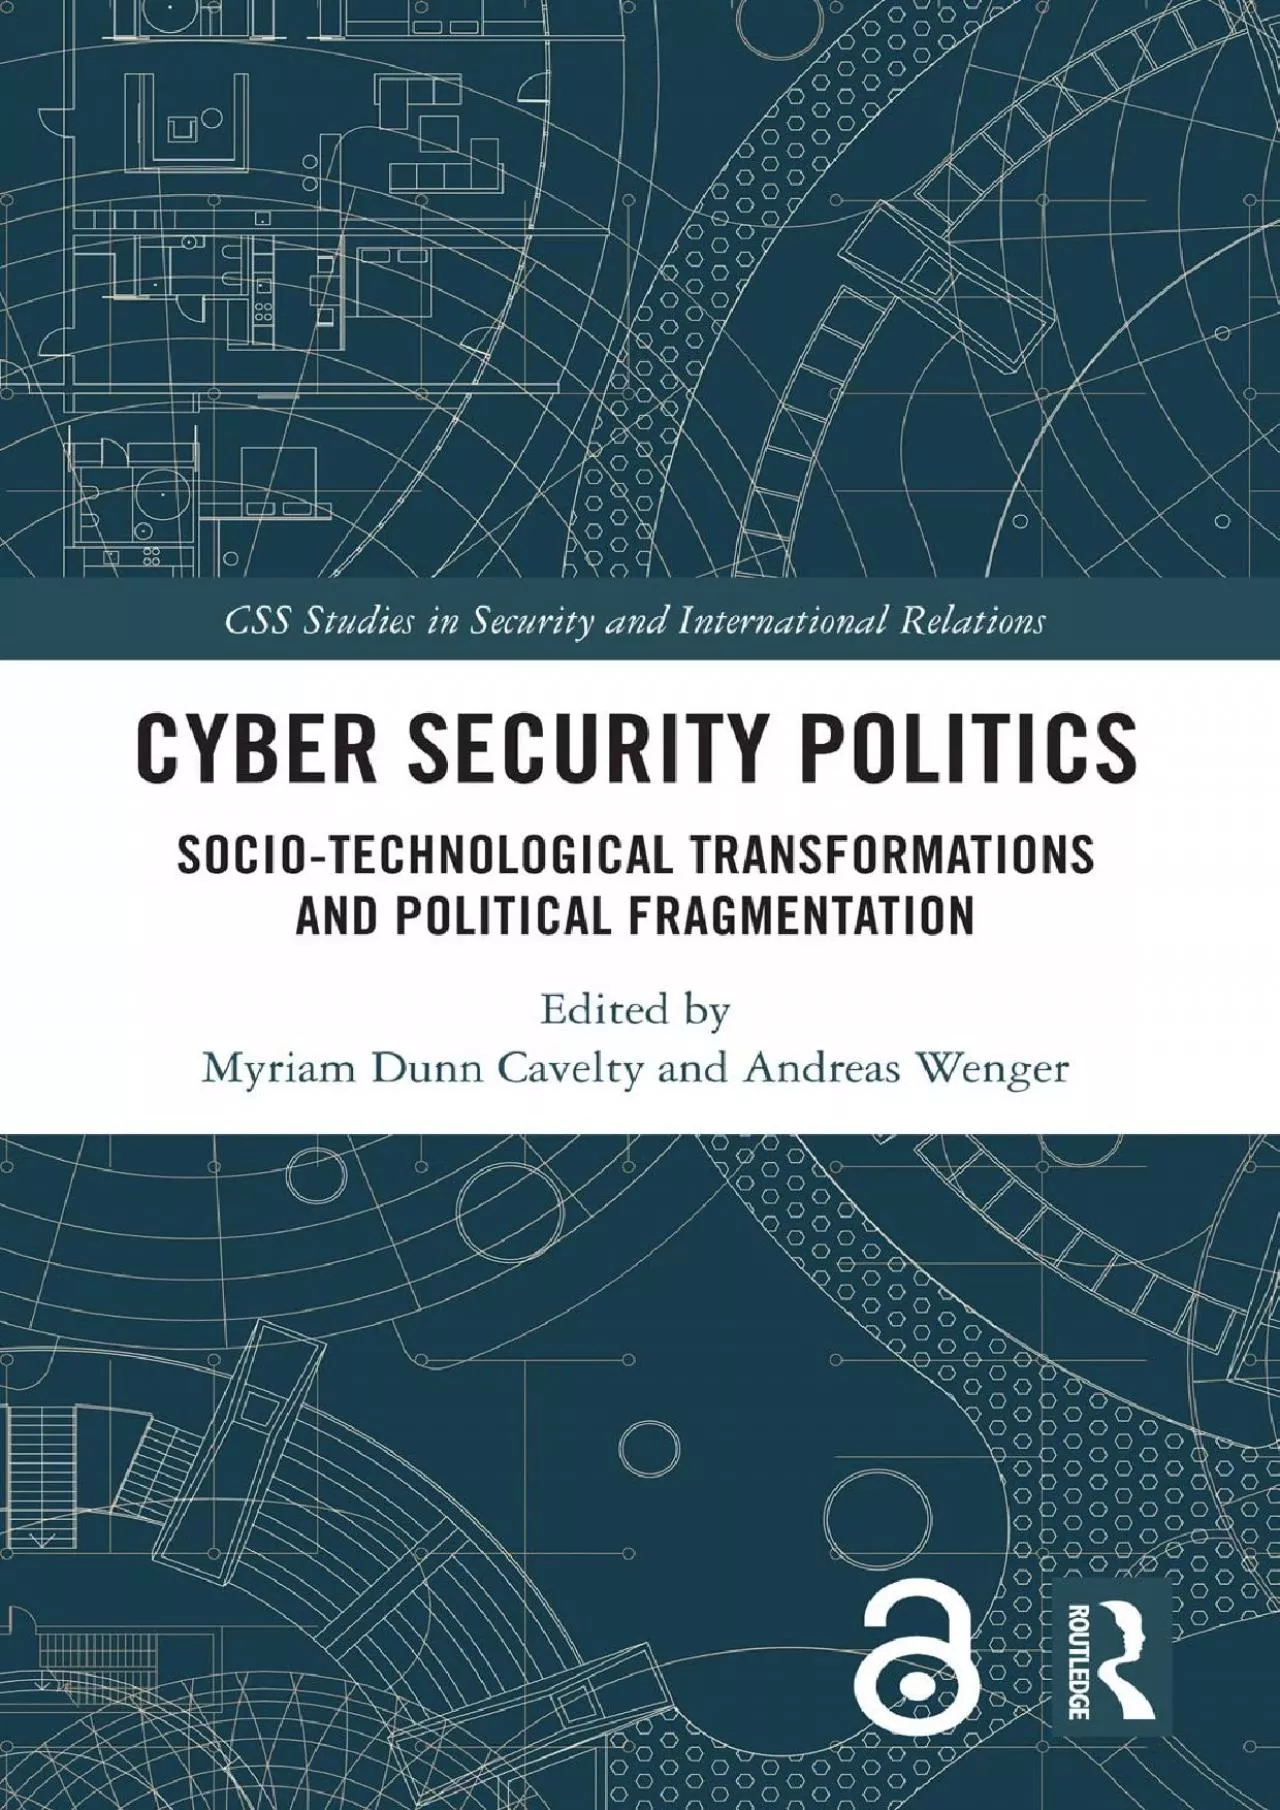 [BEST]-Cyber Security Politics: Socio-Technological Transformations and Political Fragmentation